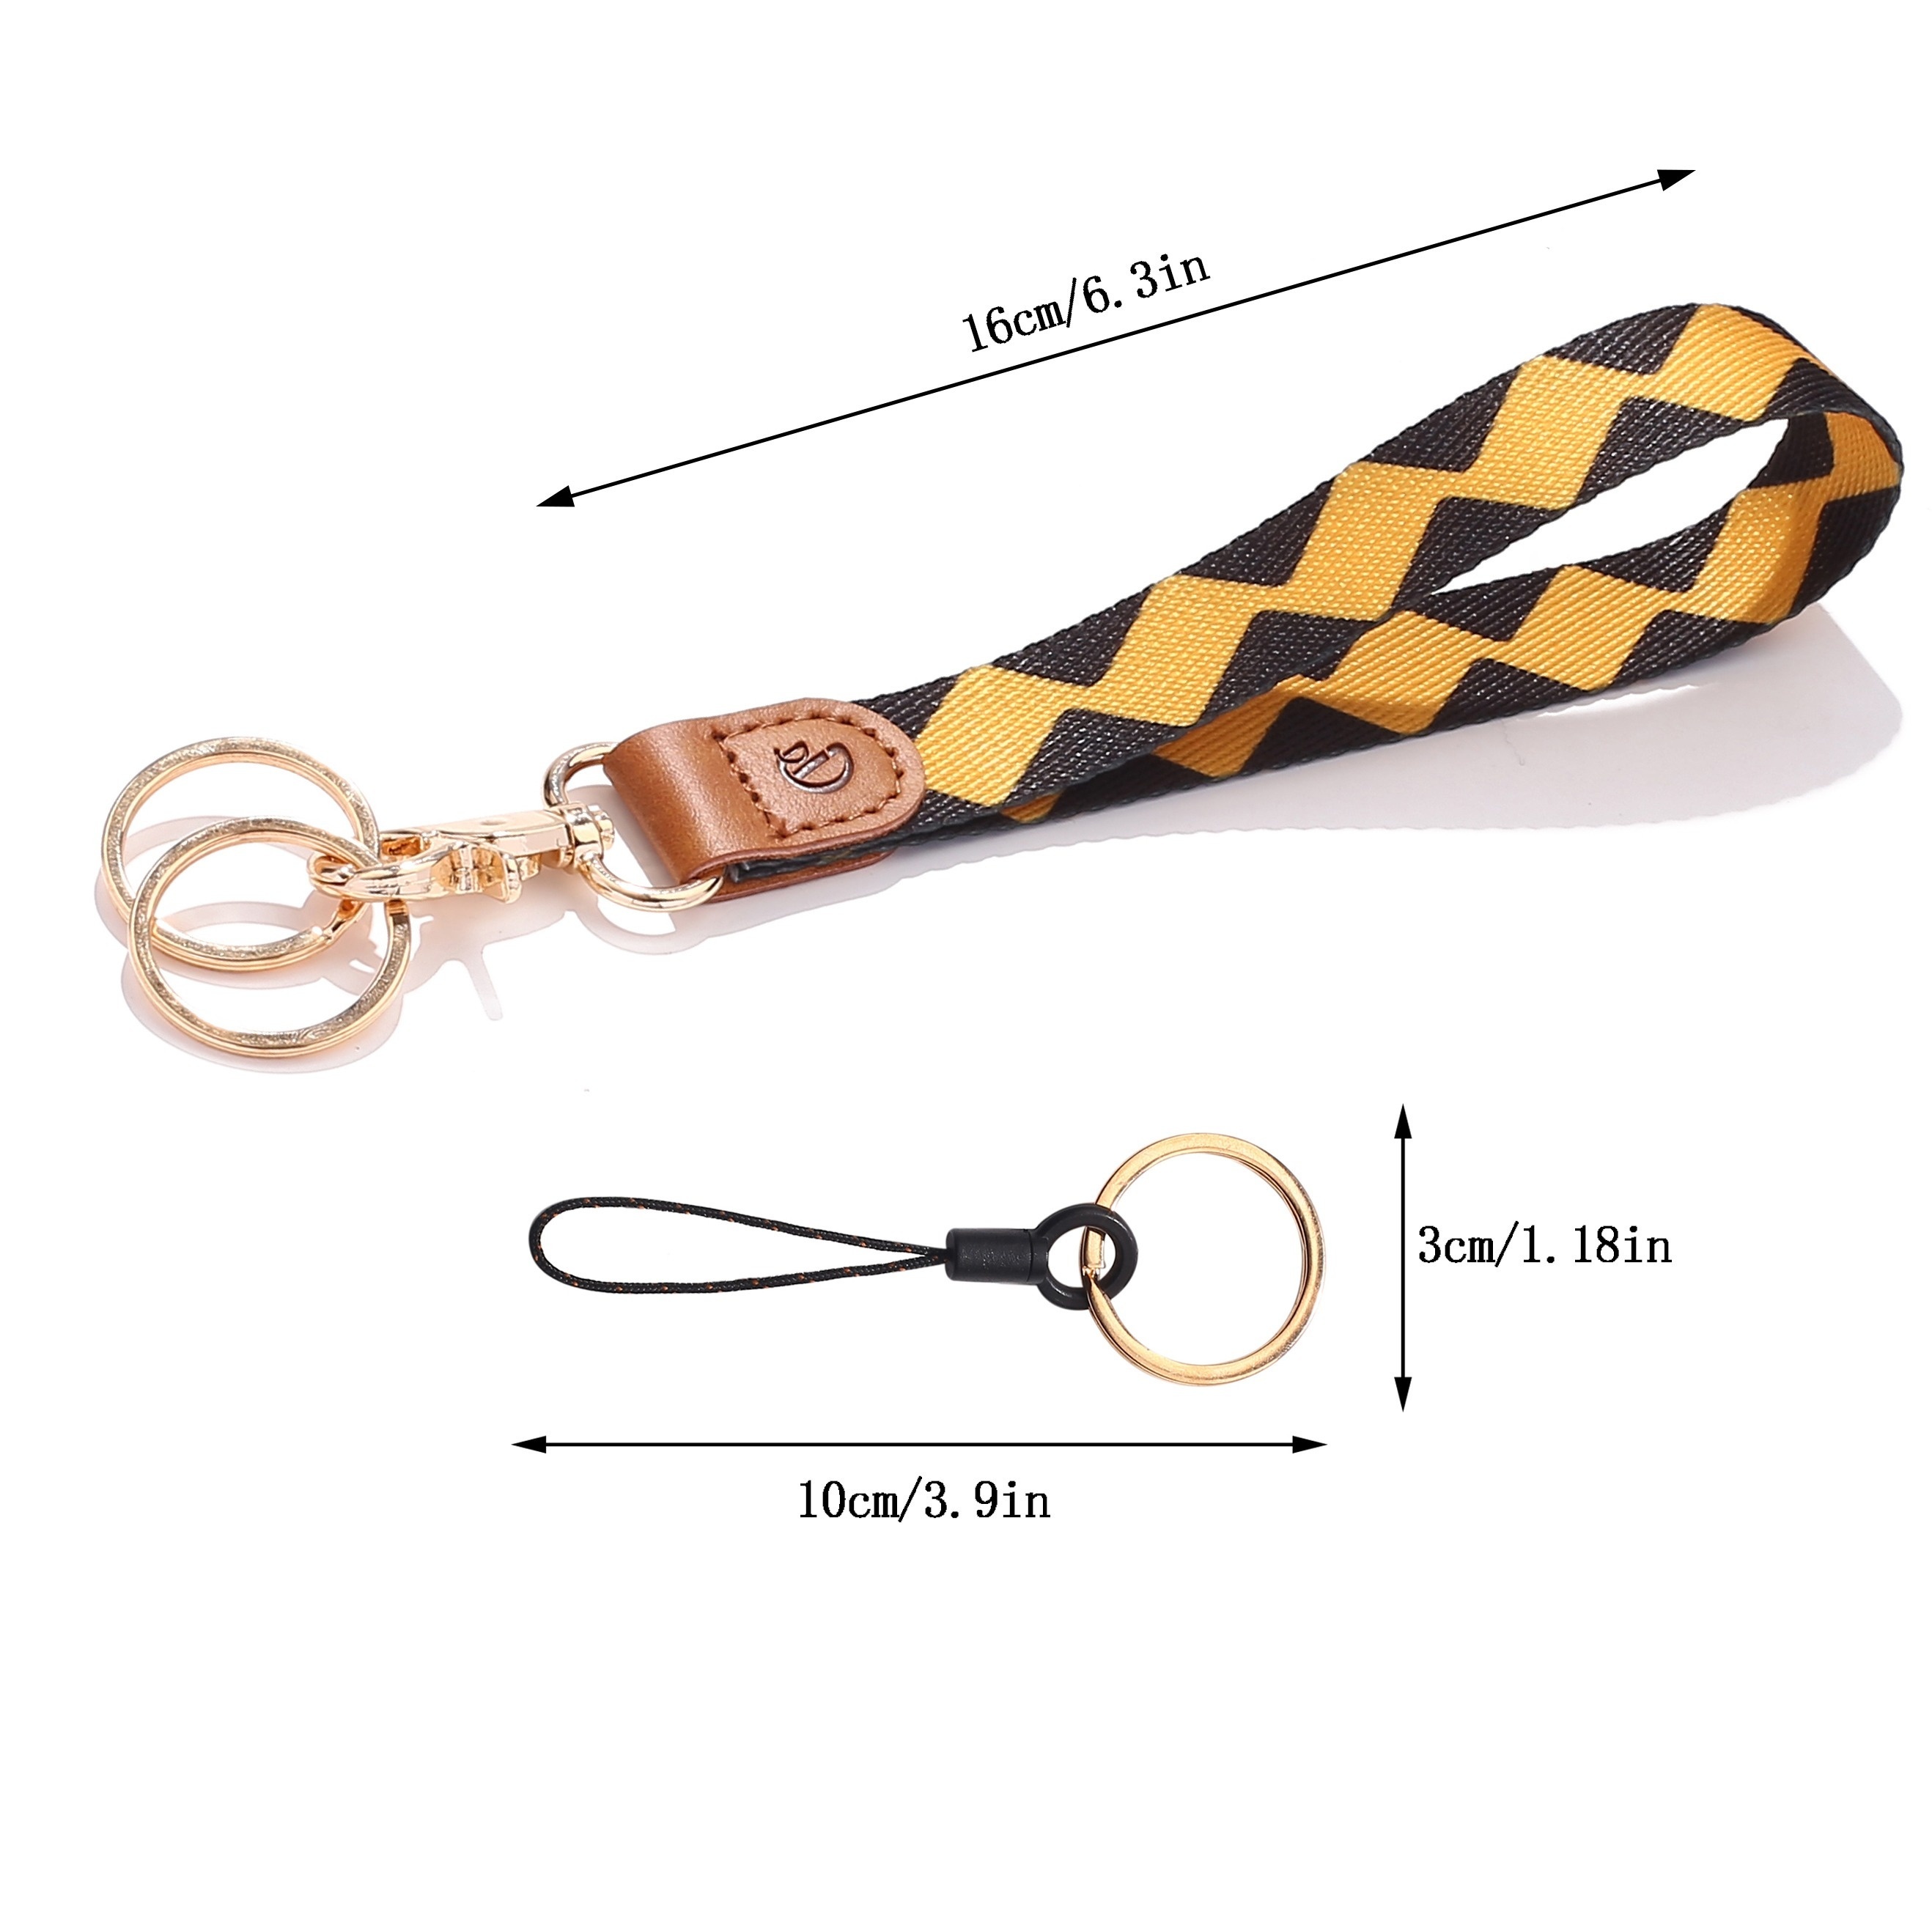  MNGARISTA Lanyard for Keys, Cool Neck Strap Key Chain Holder,  Long Lanyard for ID Badges Wallet : Office Products